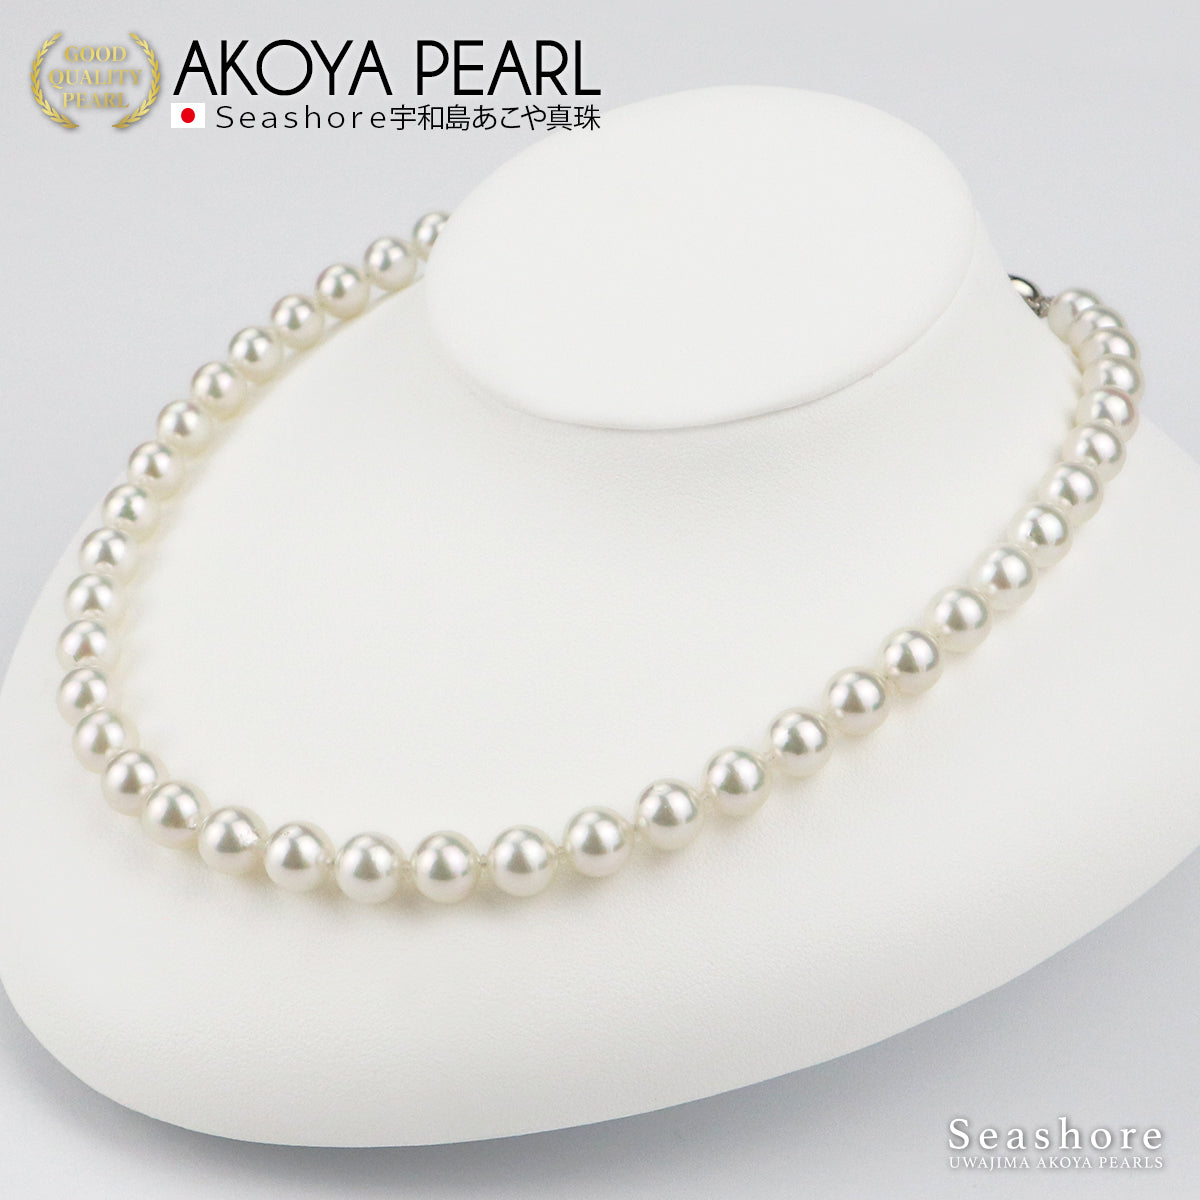 [Natural White] [Hanadama Pearl] Uncolored Akoya Pearl Formal Necklace Set of 2 [8.0-8.5mm] (Earrings/Earrings) Akoya Pearl Certificate of Authenticity Storage Case Included Ceremonies